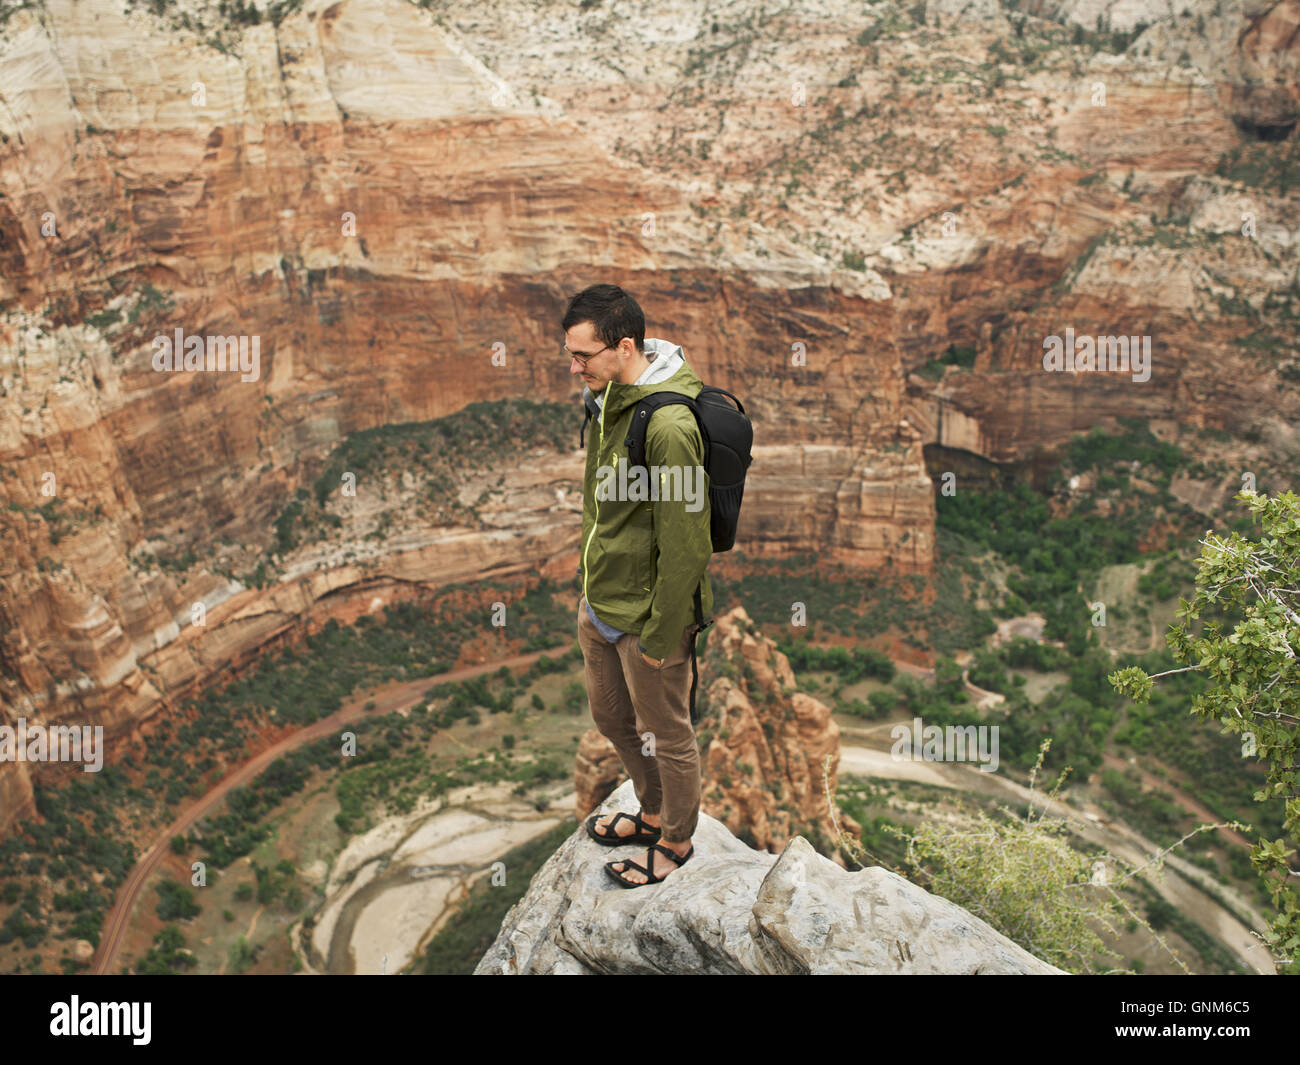 A hiker stands at the top of a peak in Utah's Zion National Park Stock Photo